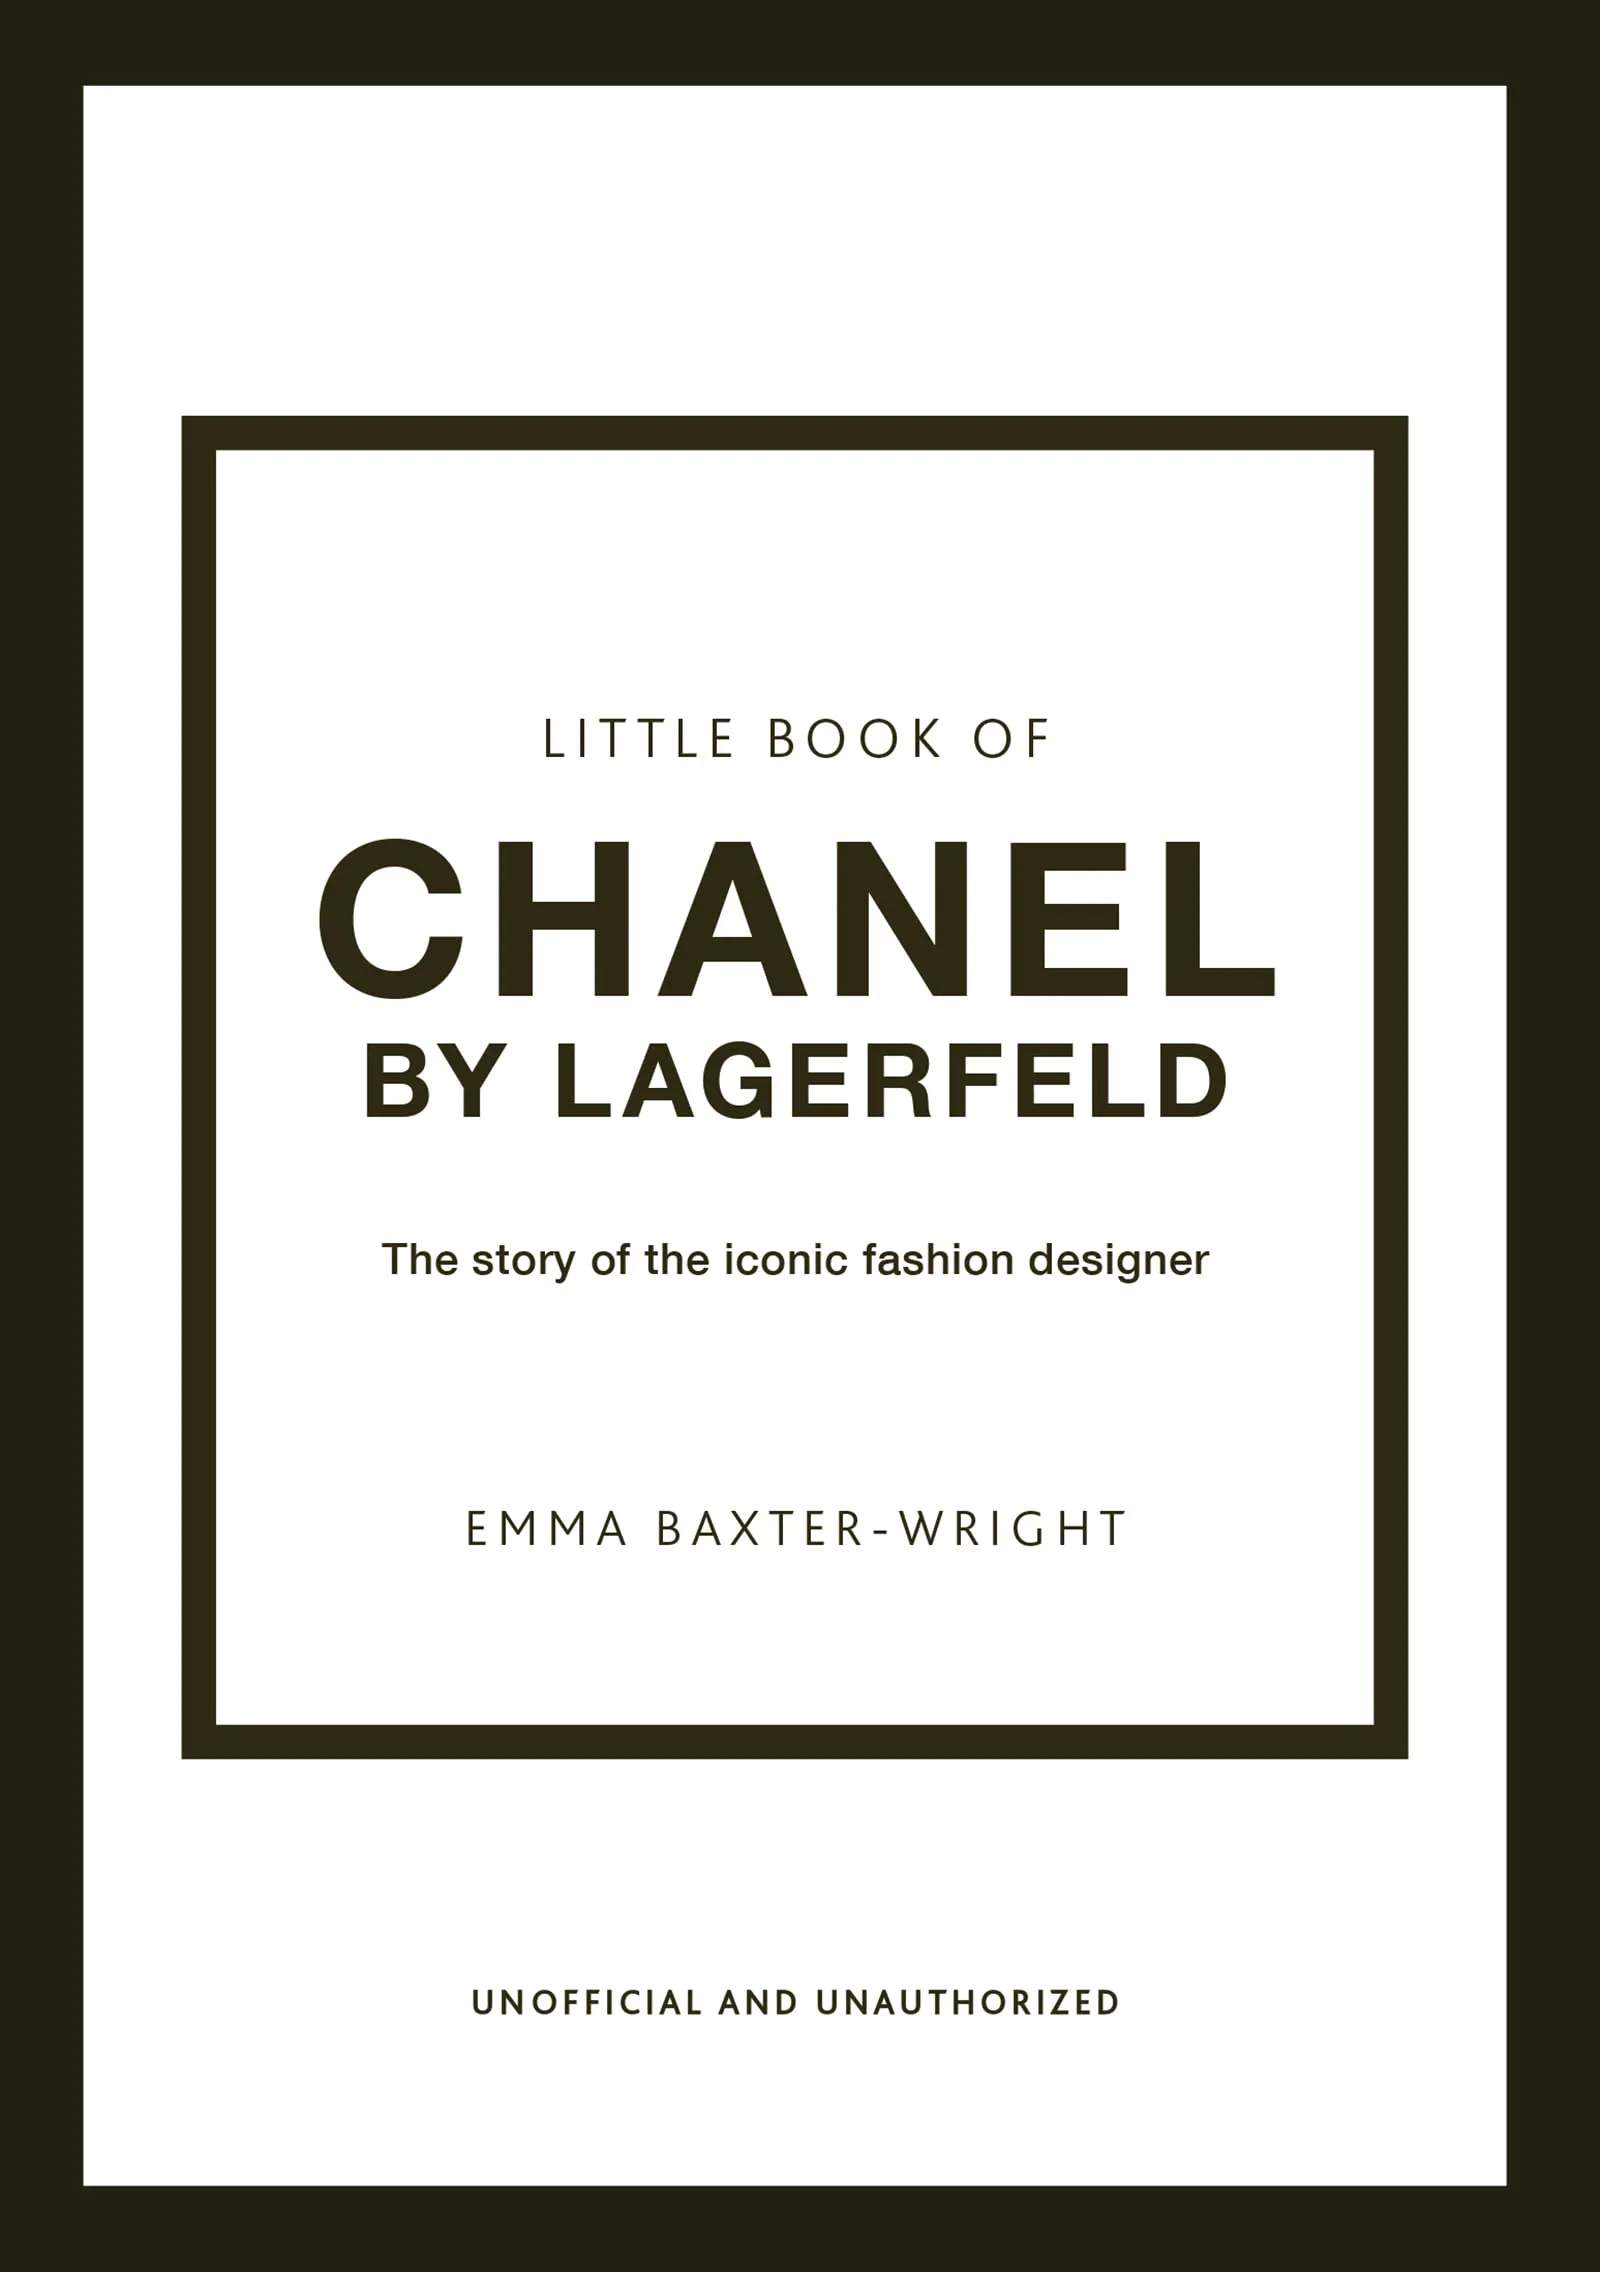 New Mags øvrige bøger The Little Book of Chanel by Lagerfeld